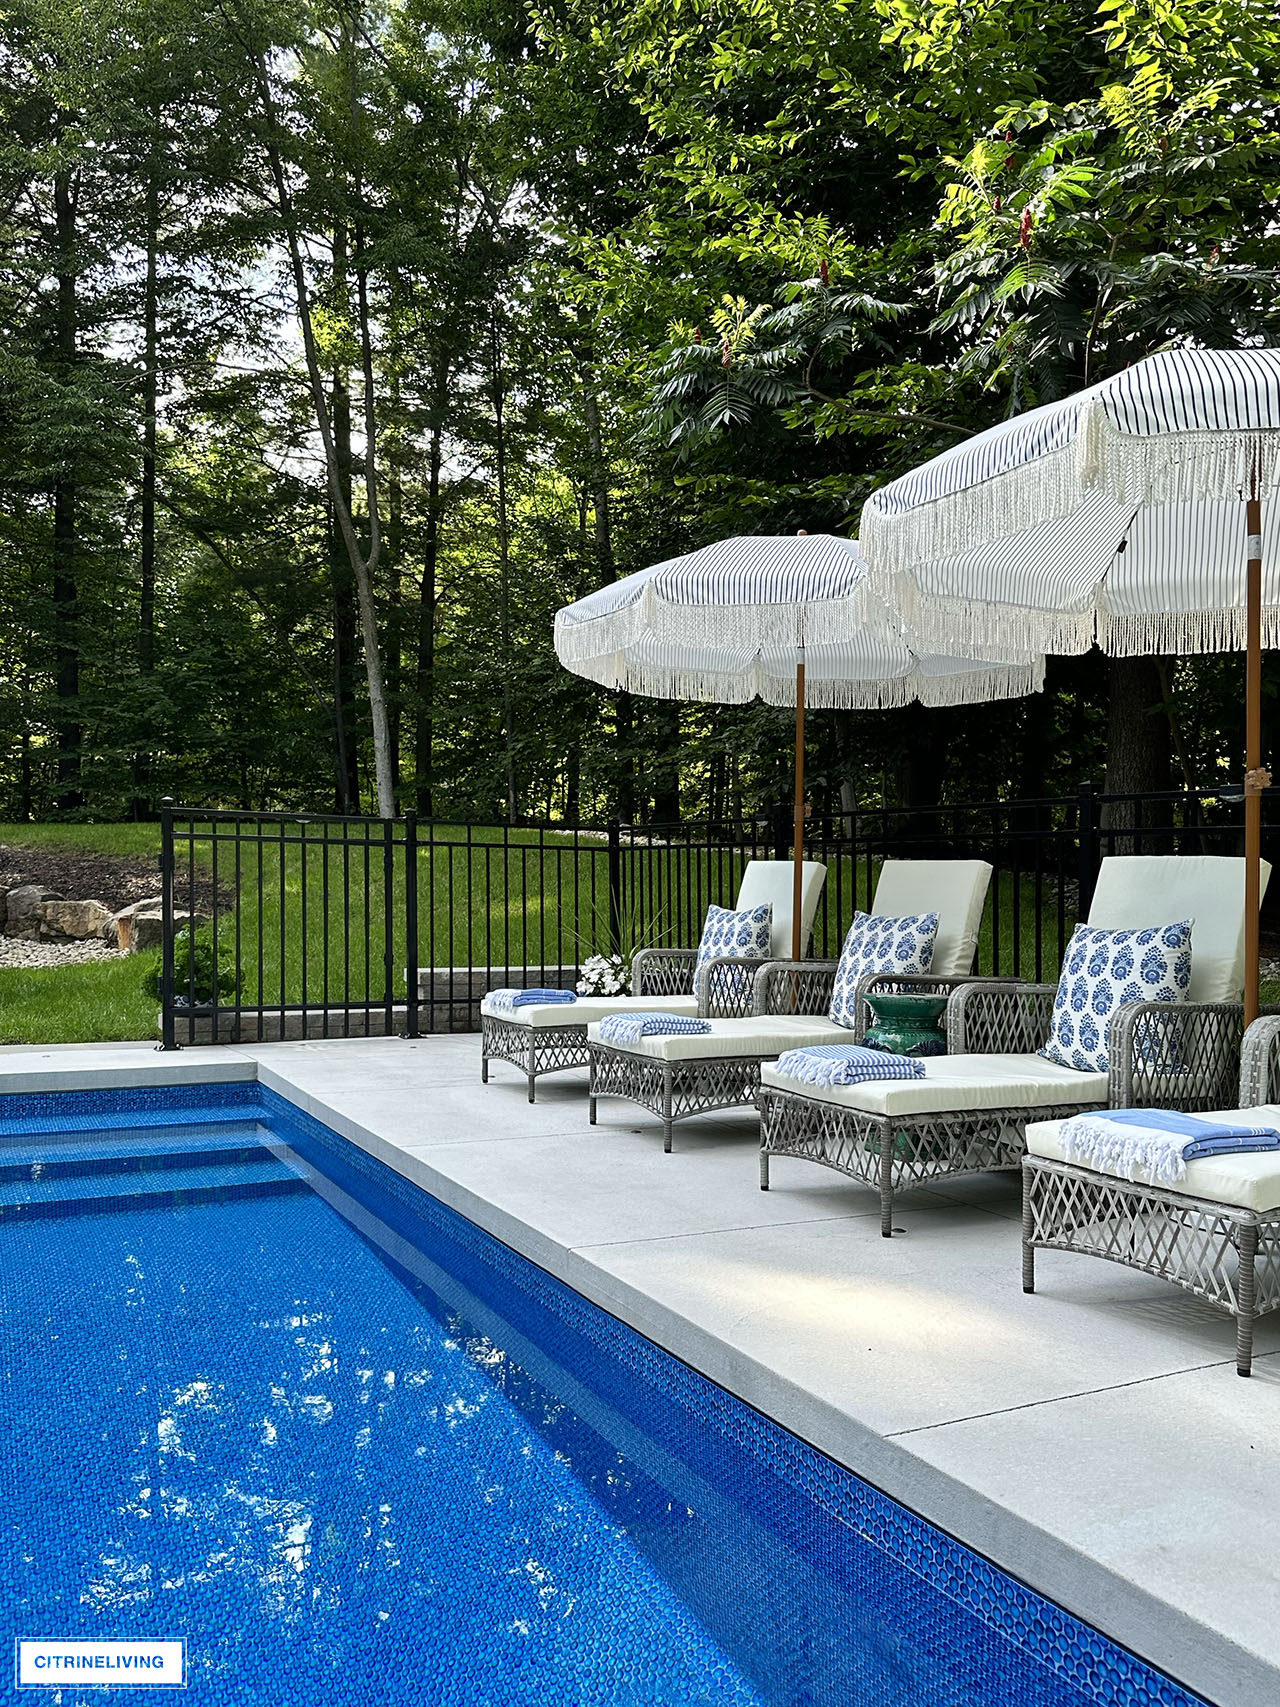 Resort style pool with loungers and fringe umbrellas.